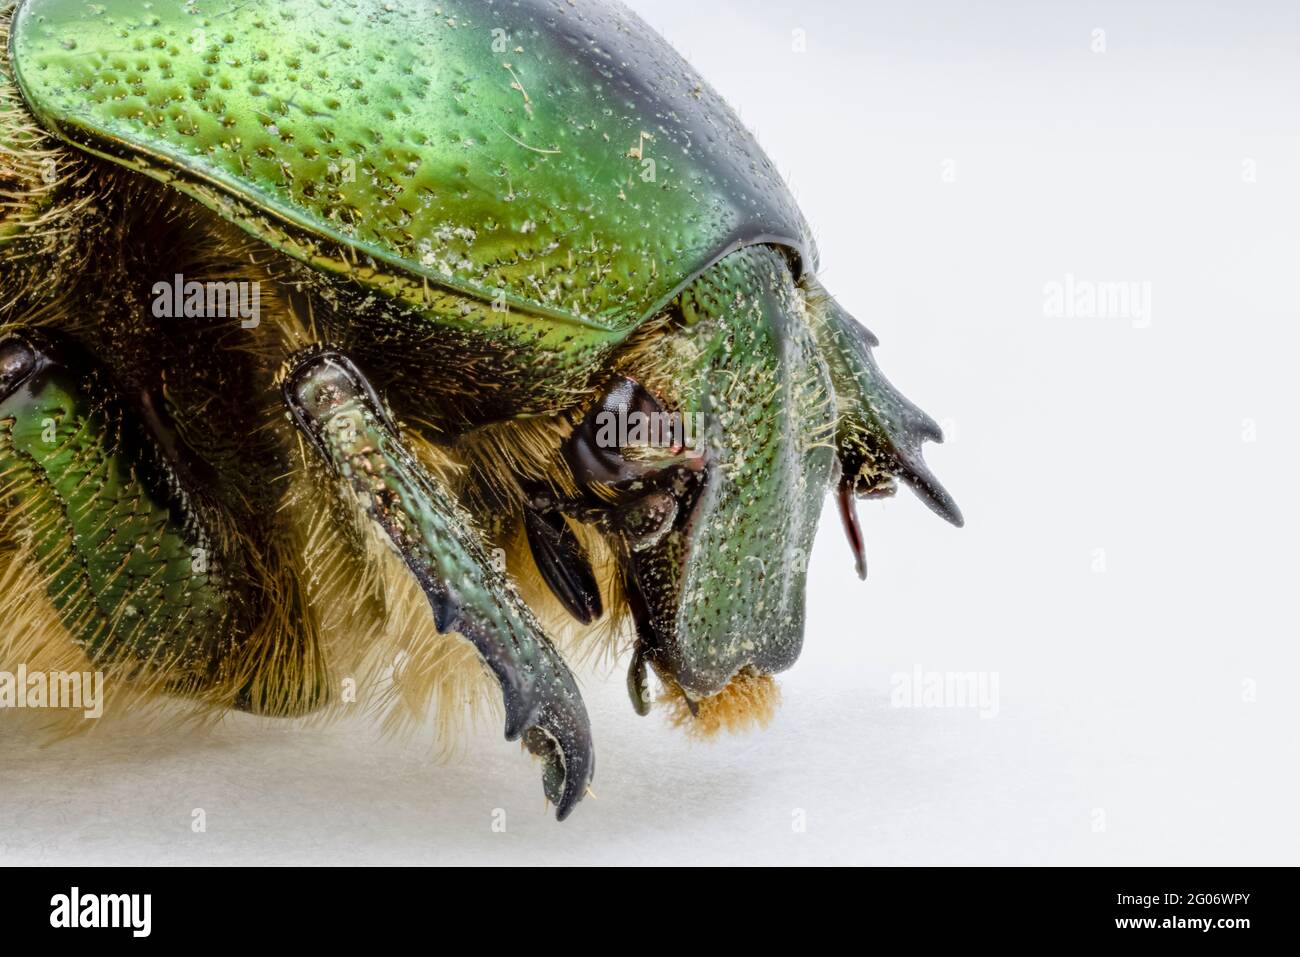 Close up anterior view of a large metallic green European Rose Chafer (Cetonia aurata) beetle, common in southern England, against a white background Stock Photo